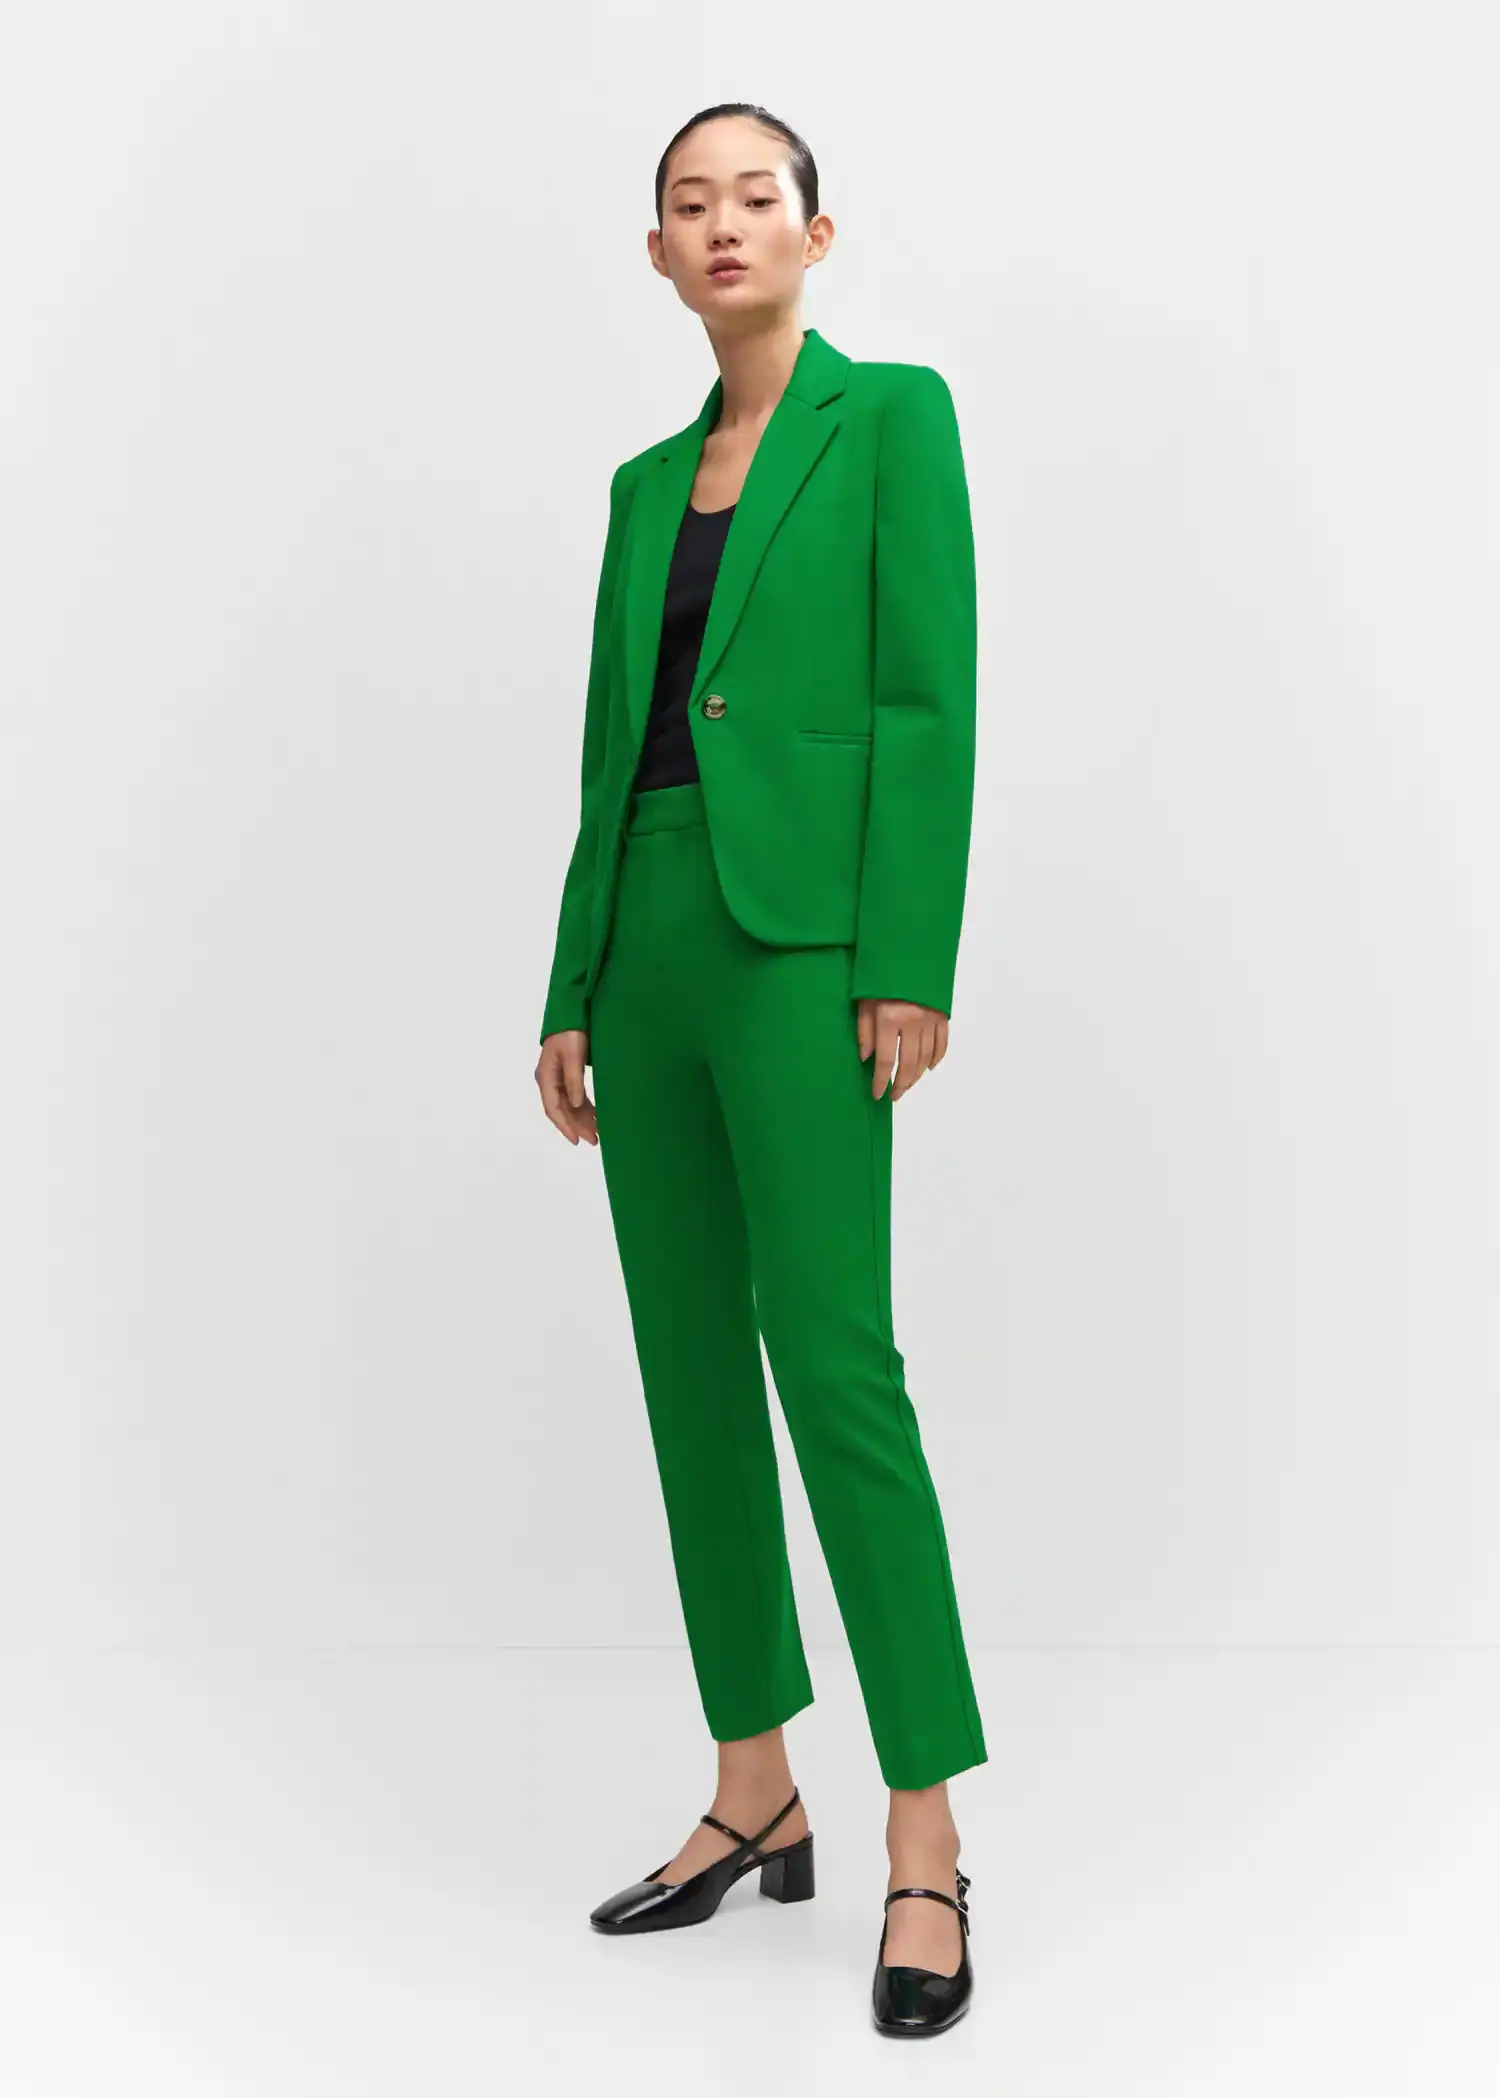 Mango Fitted jacket with blunt stitching. a woman wearing a green suit standing in a white room. 